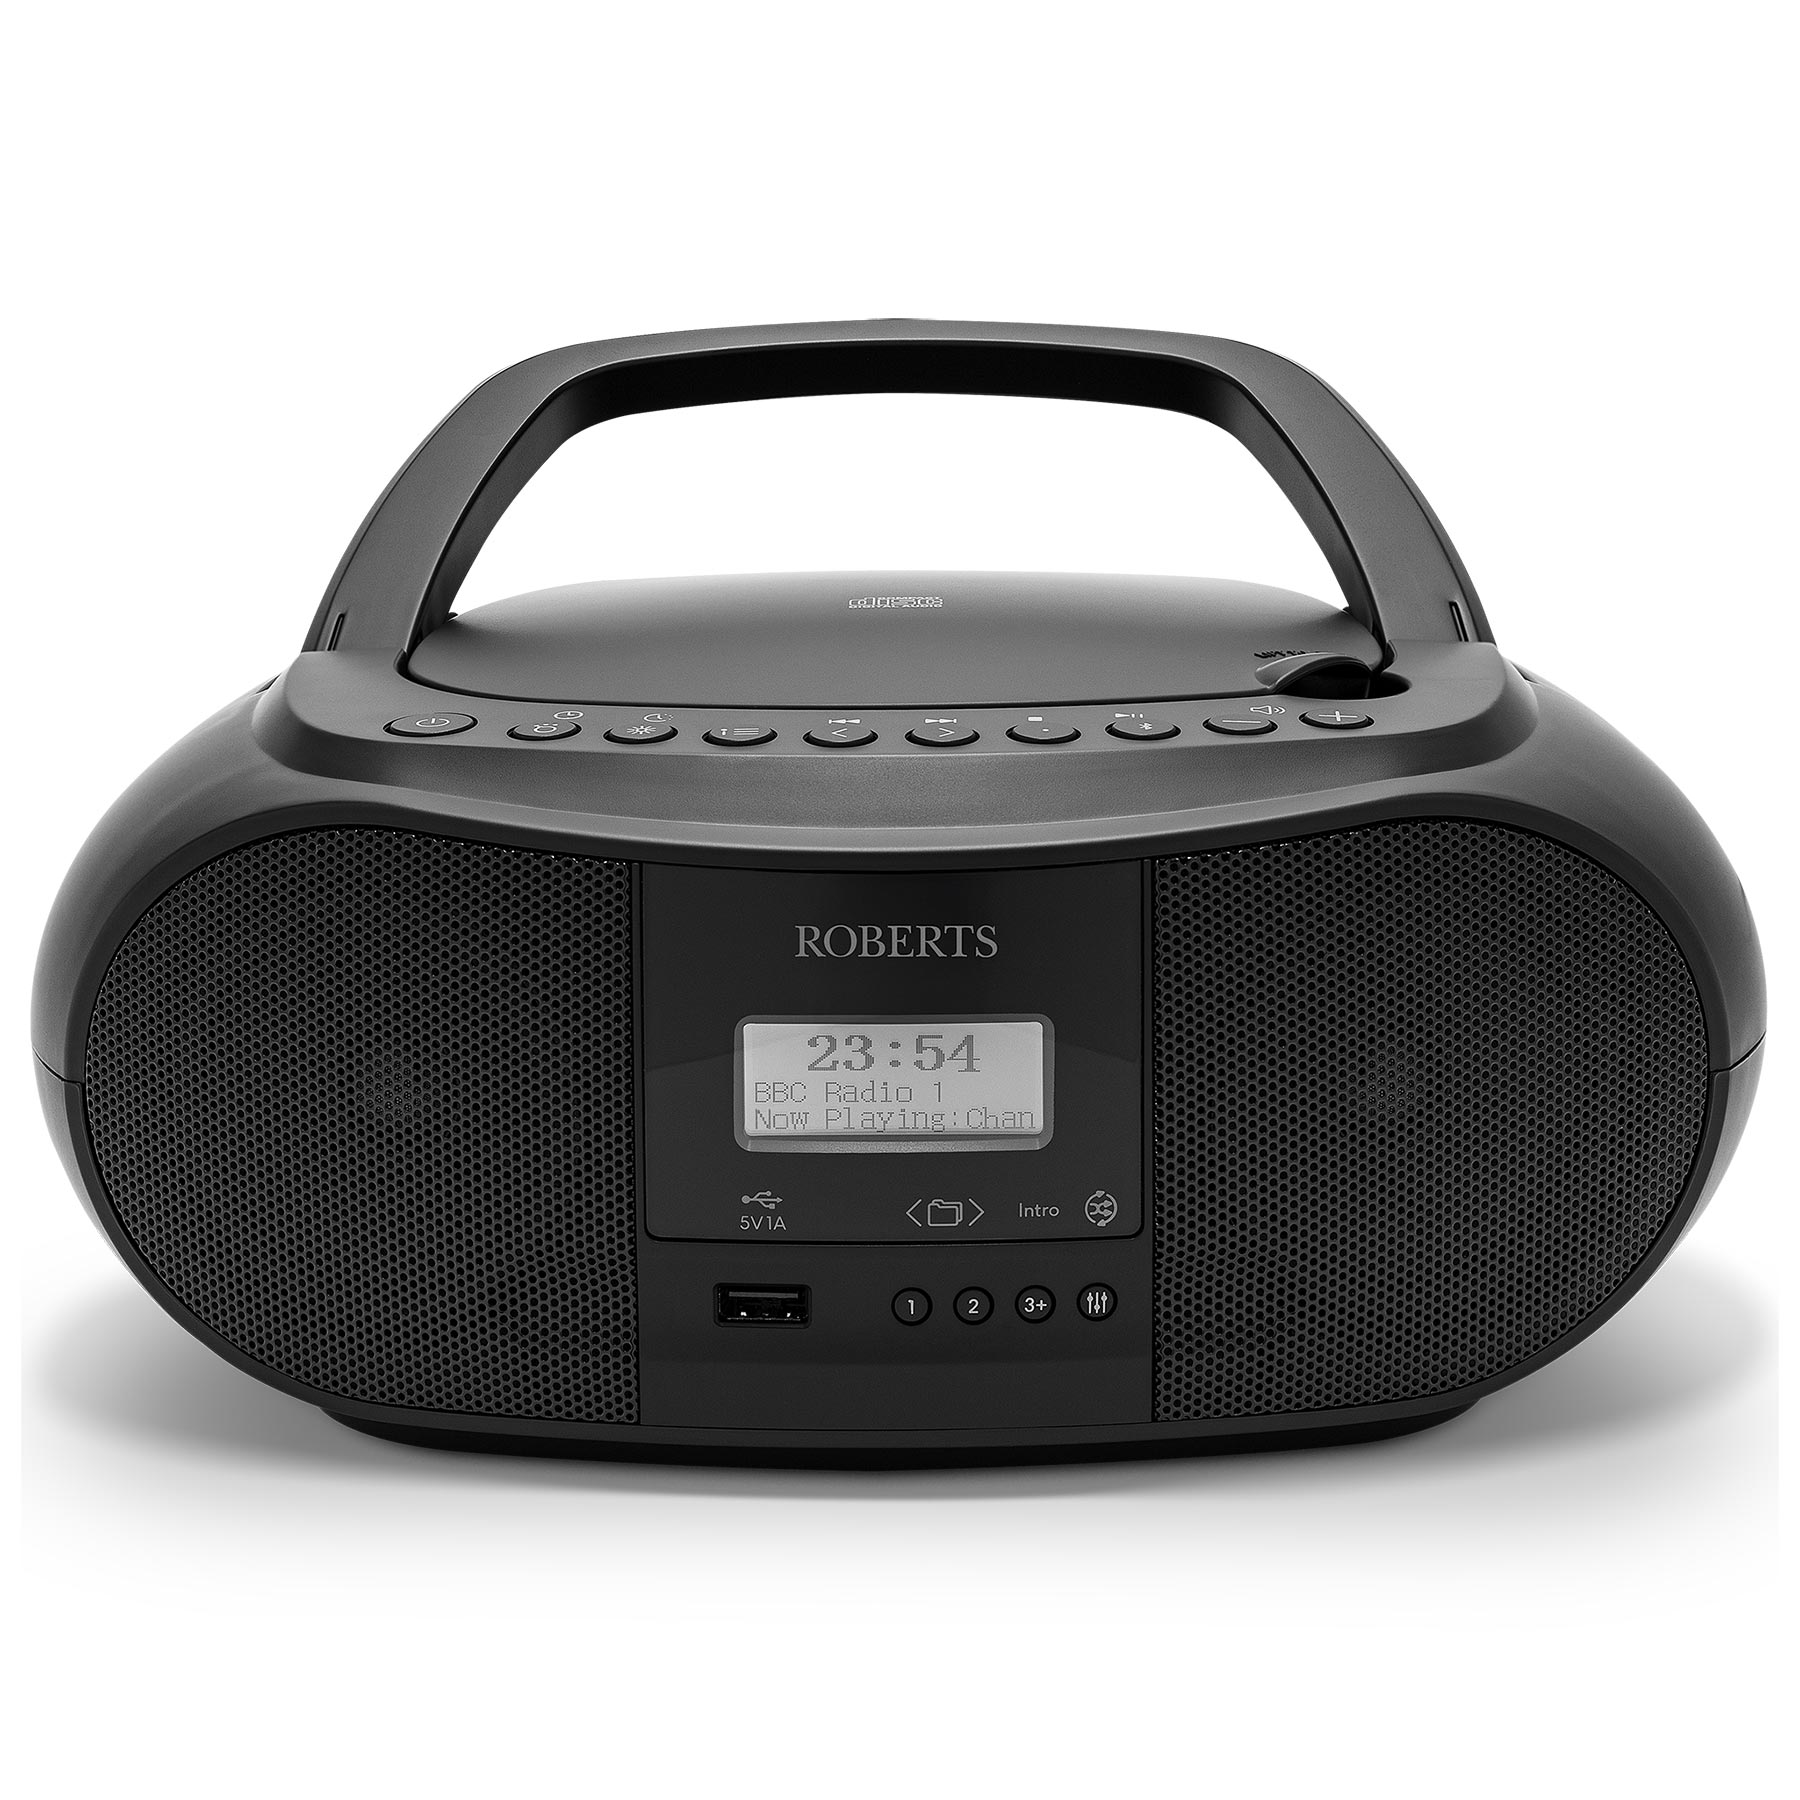 Roberts ZOOMBOX4BK DAB FM Portable Boombox with CD Player USB in Black